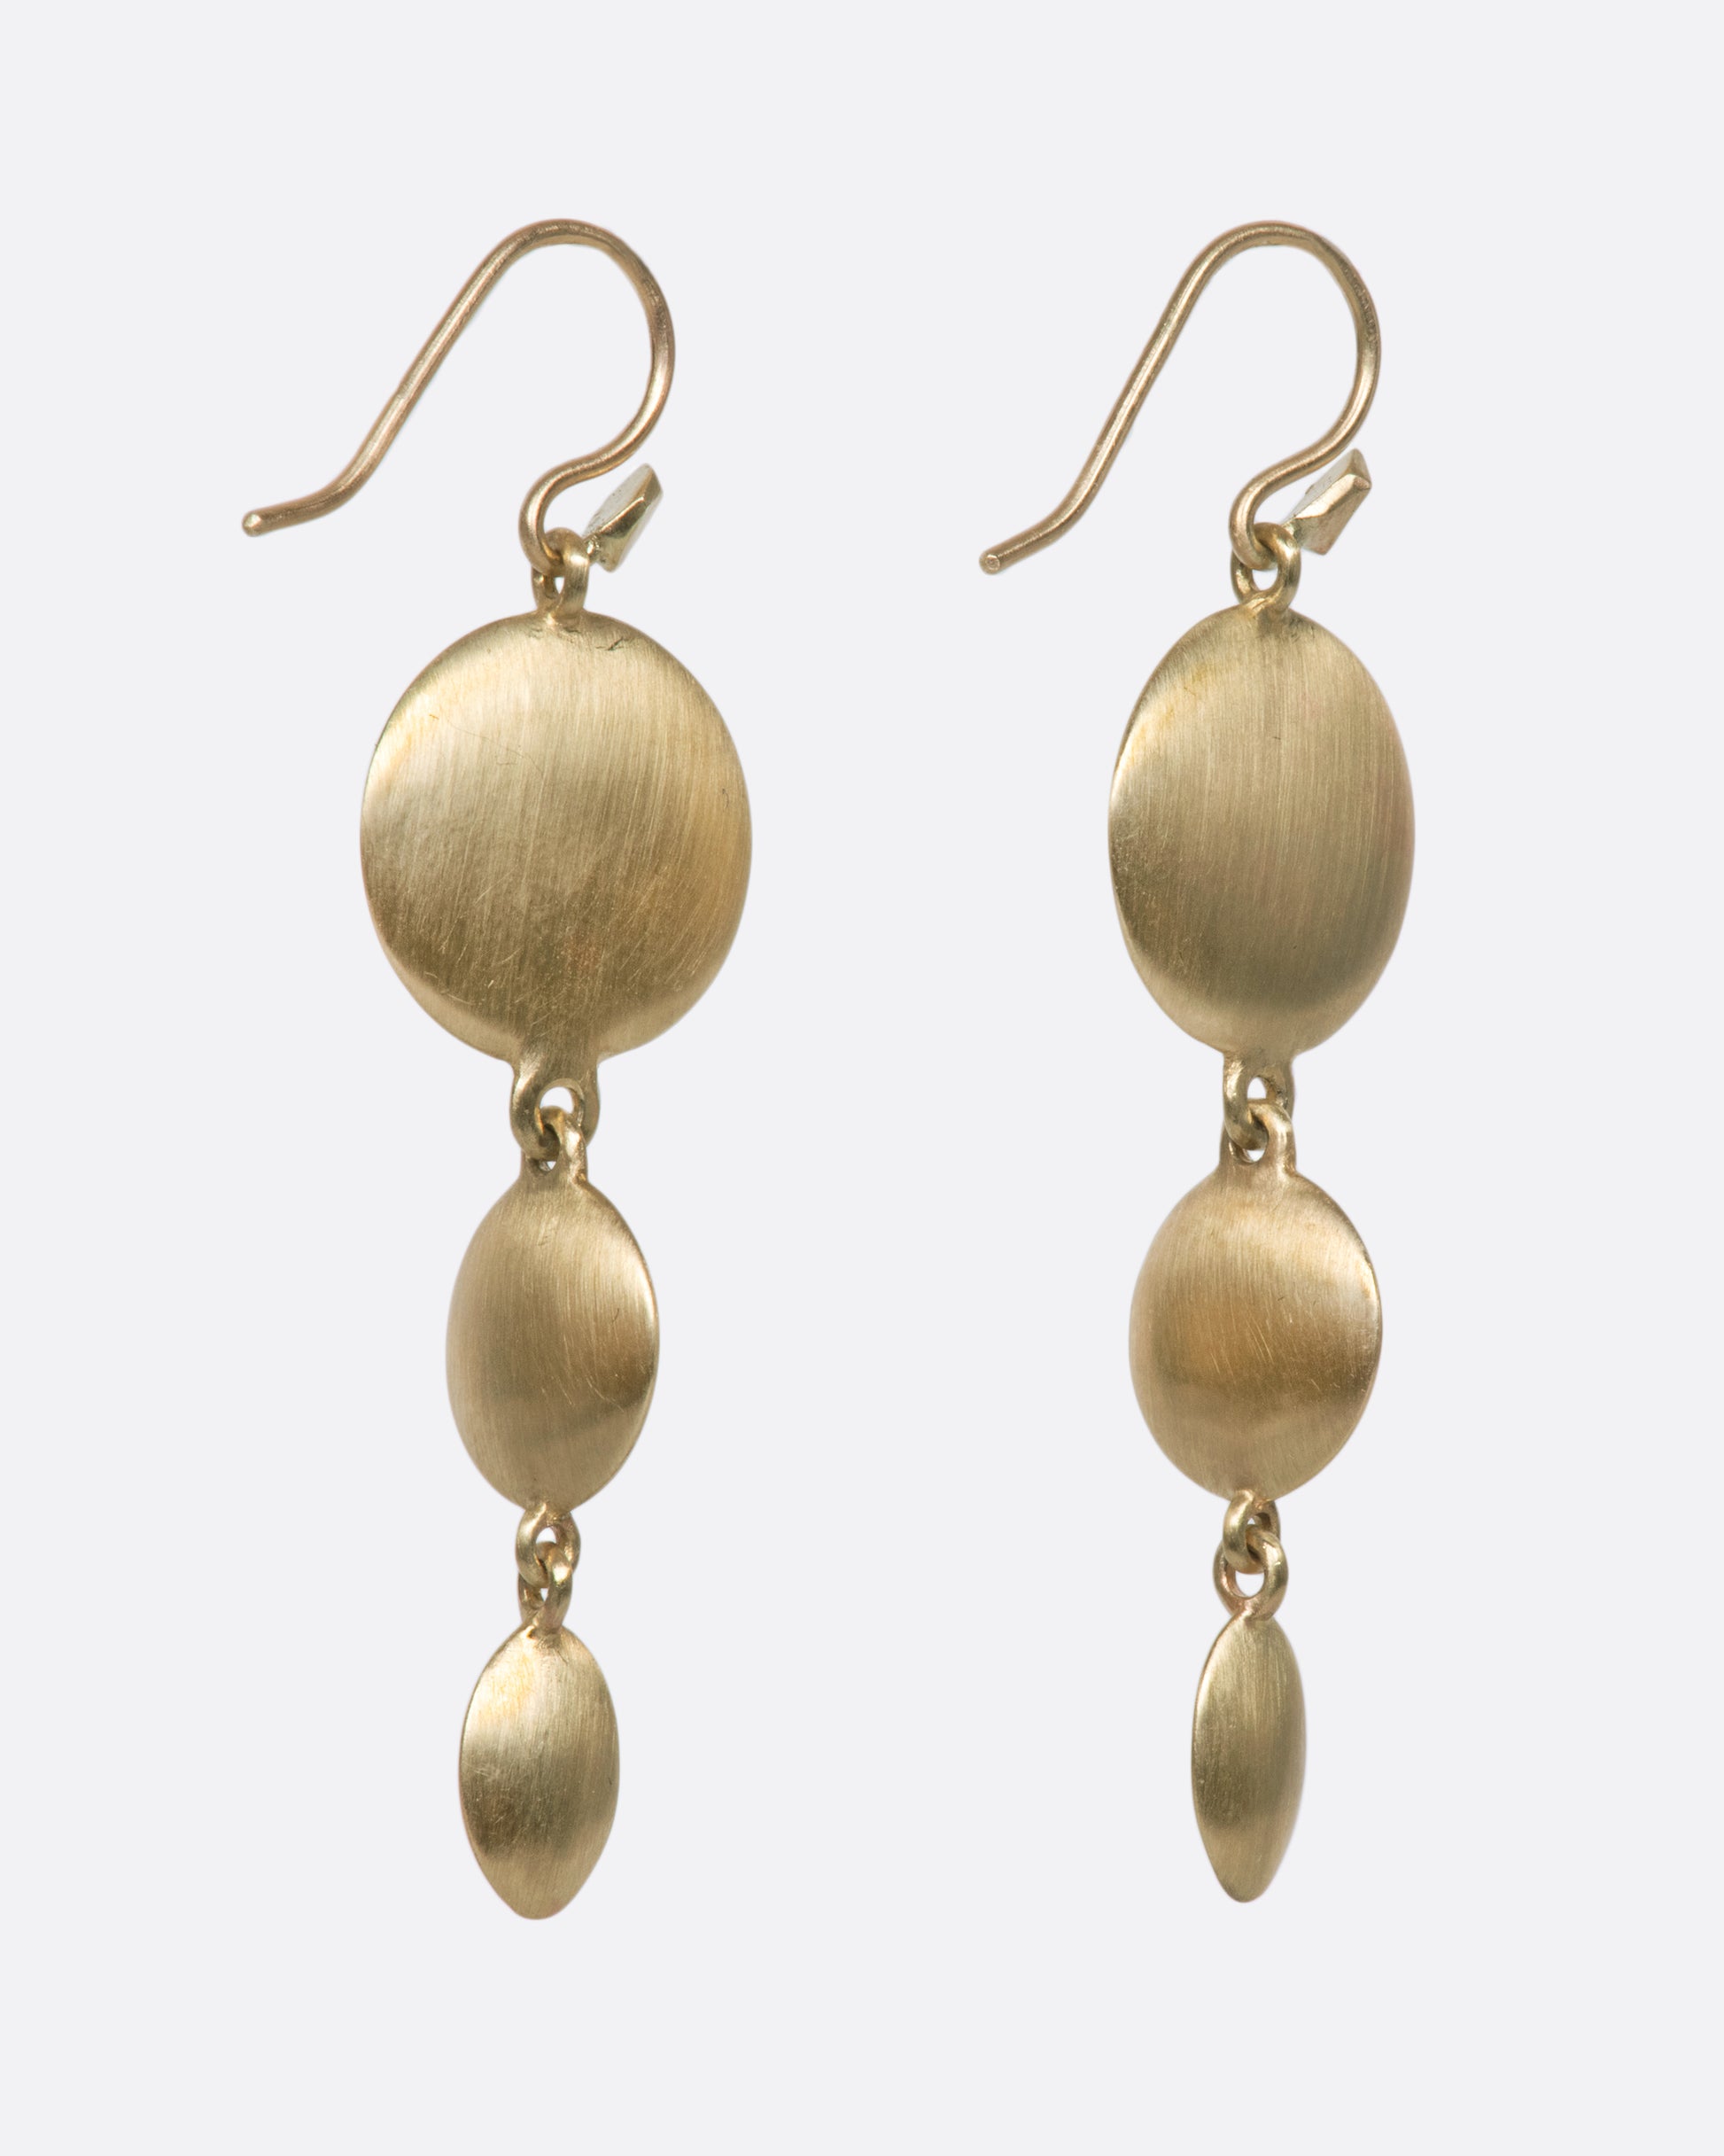 These unusual triple drop brushed gold earrings have impressive razor thin edges that make them look different from every angle